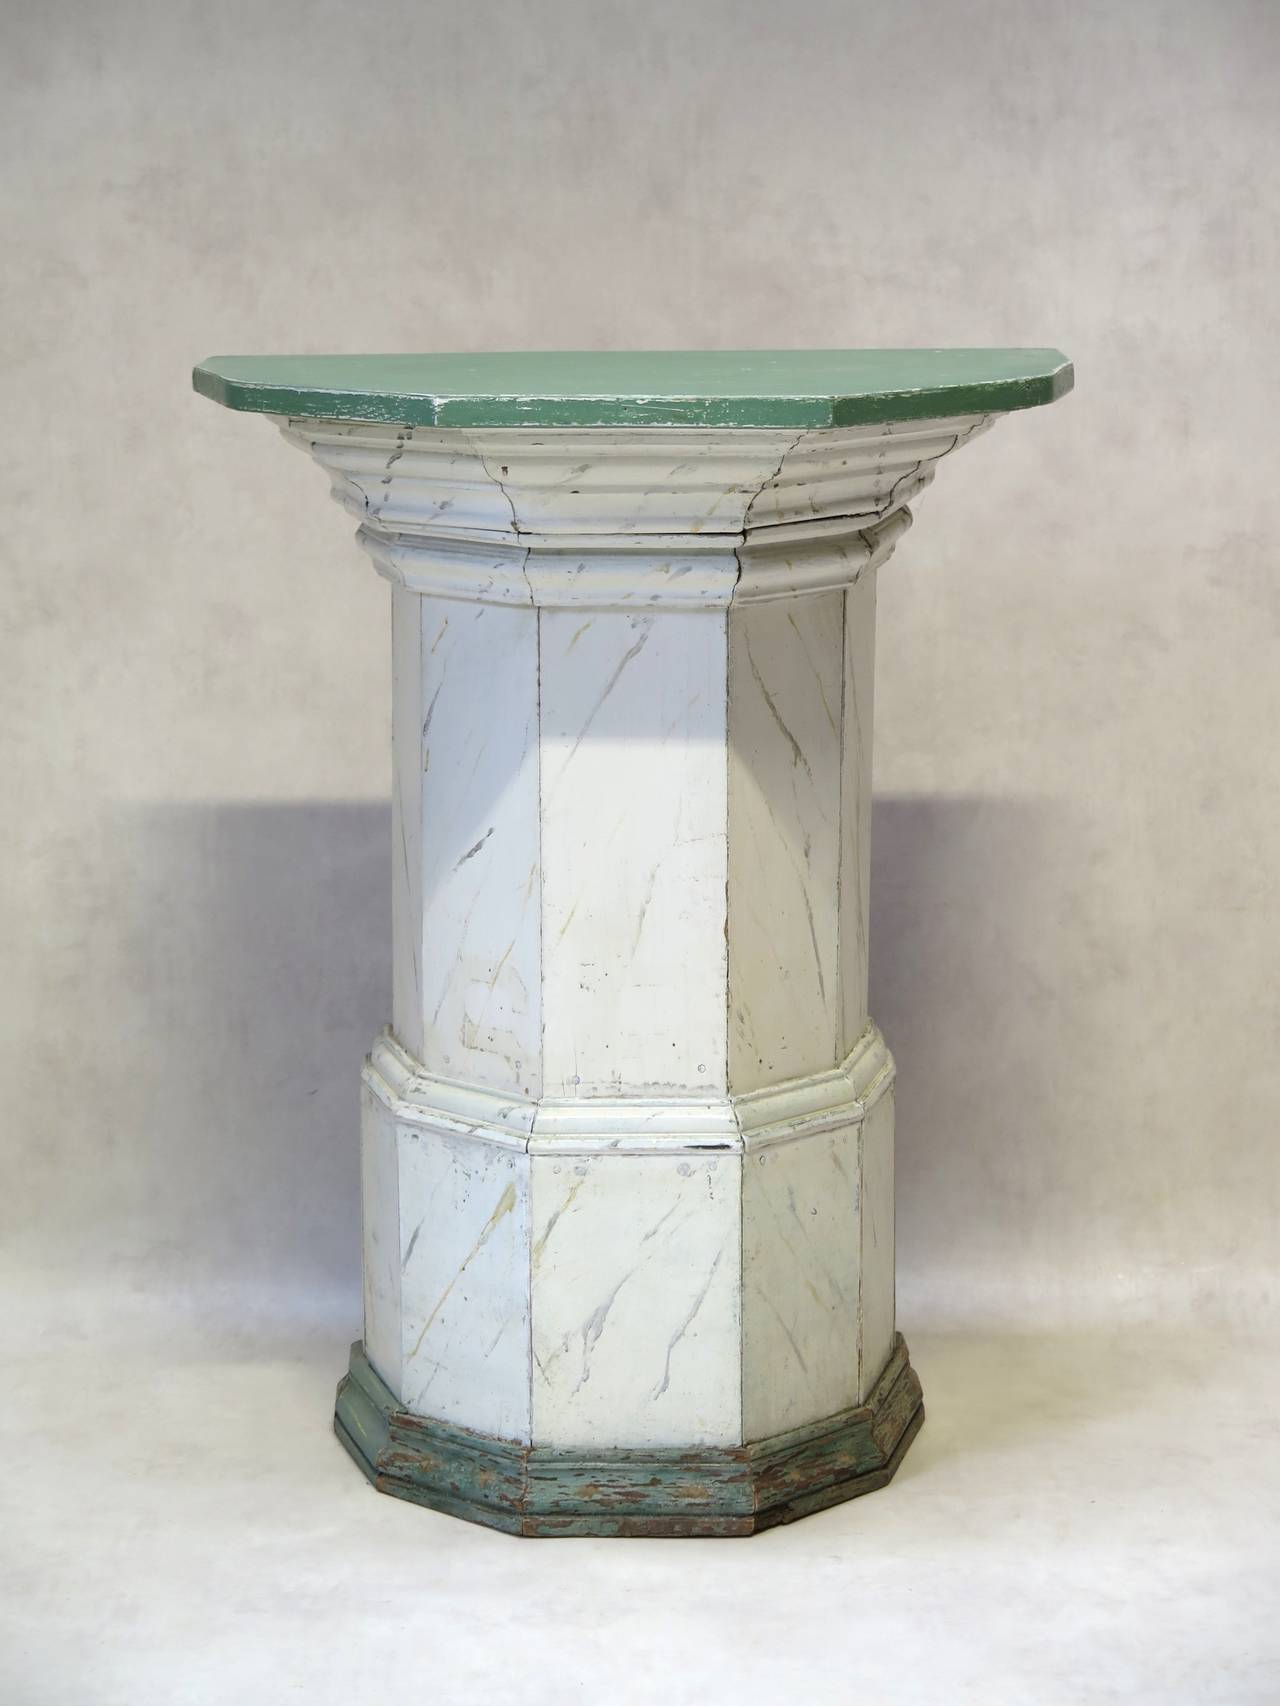 French Demilune Marble Trompe L'oeil Pedestal, France, Late 19th Century